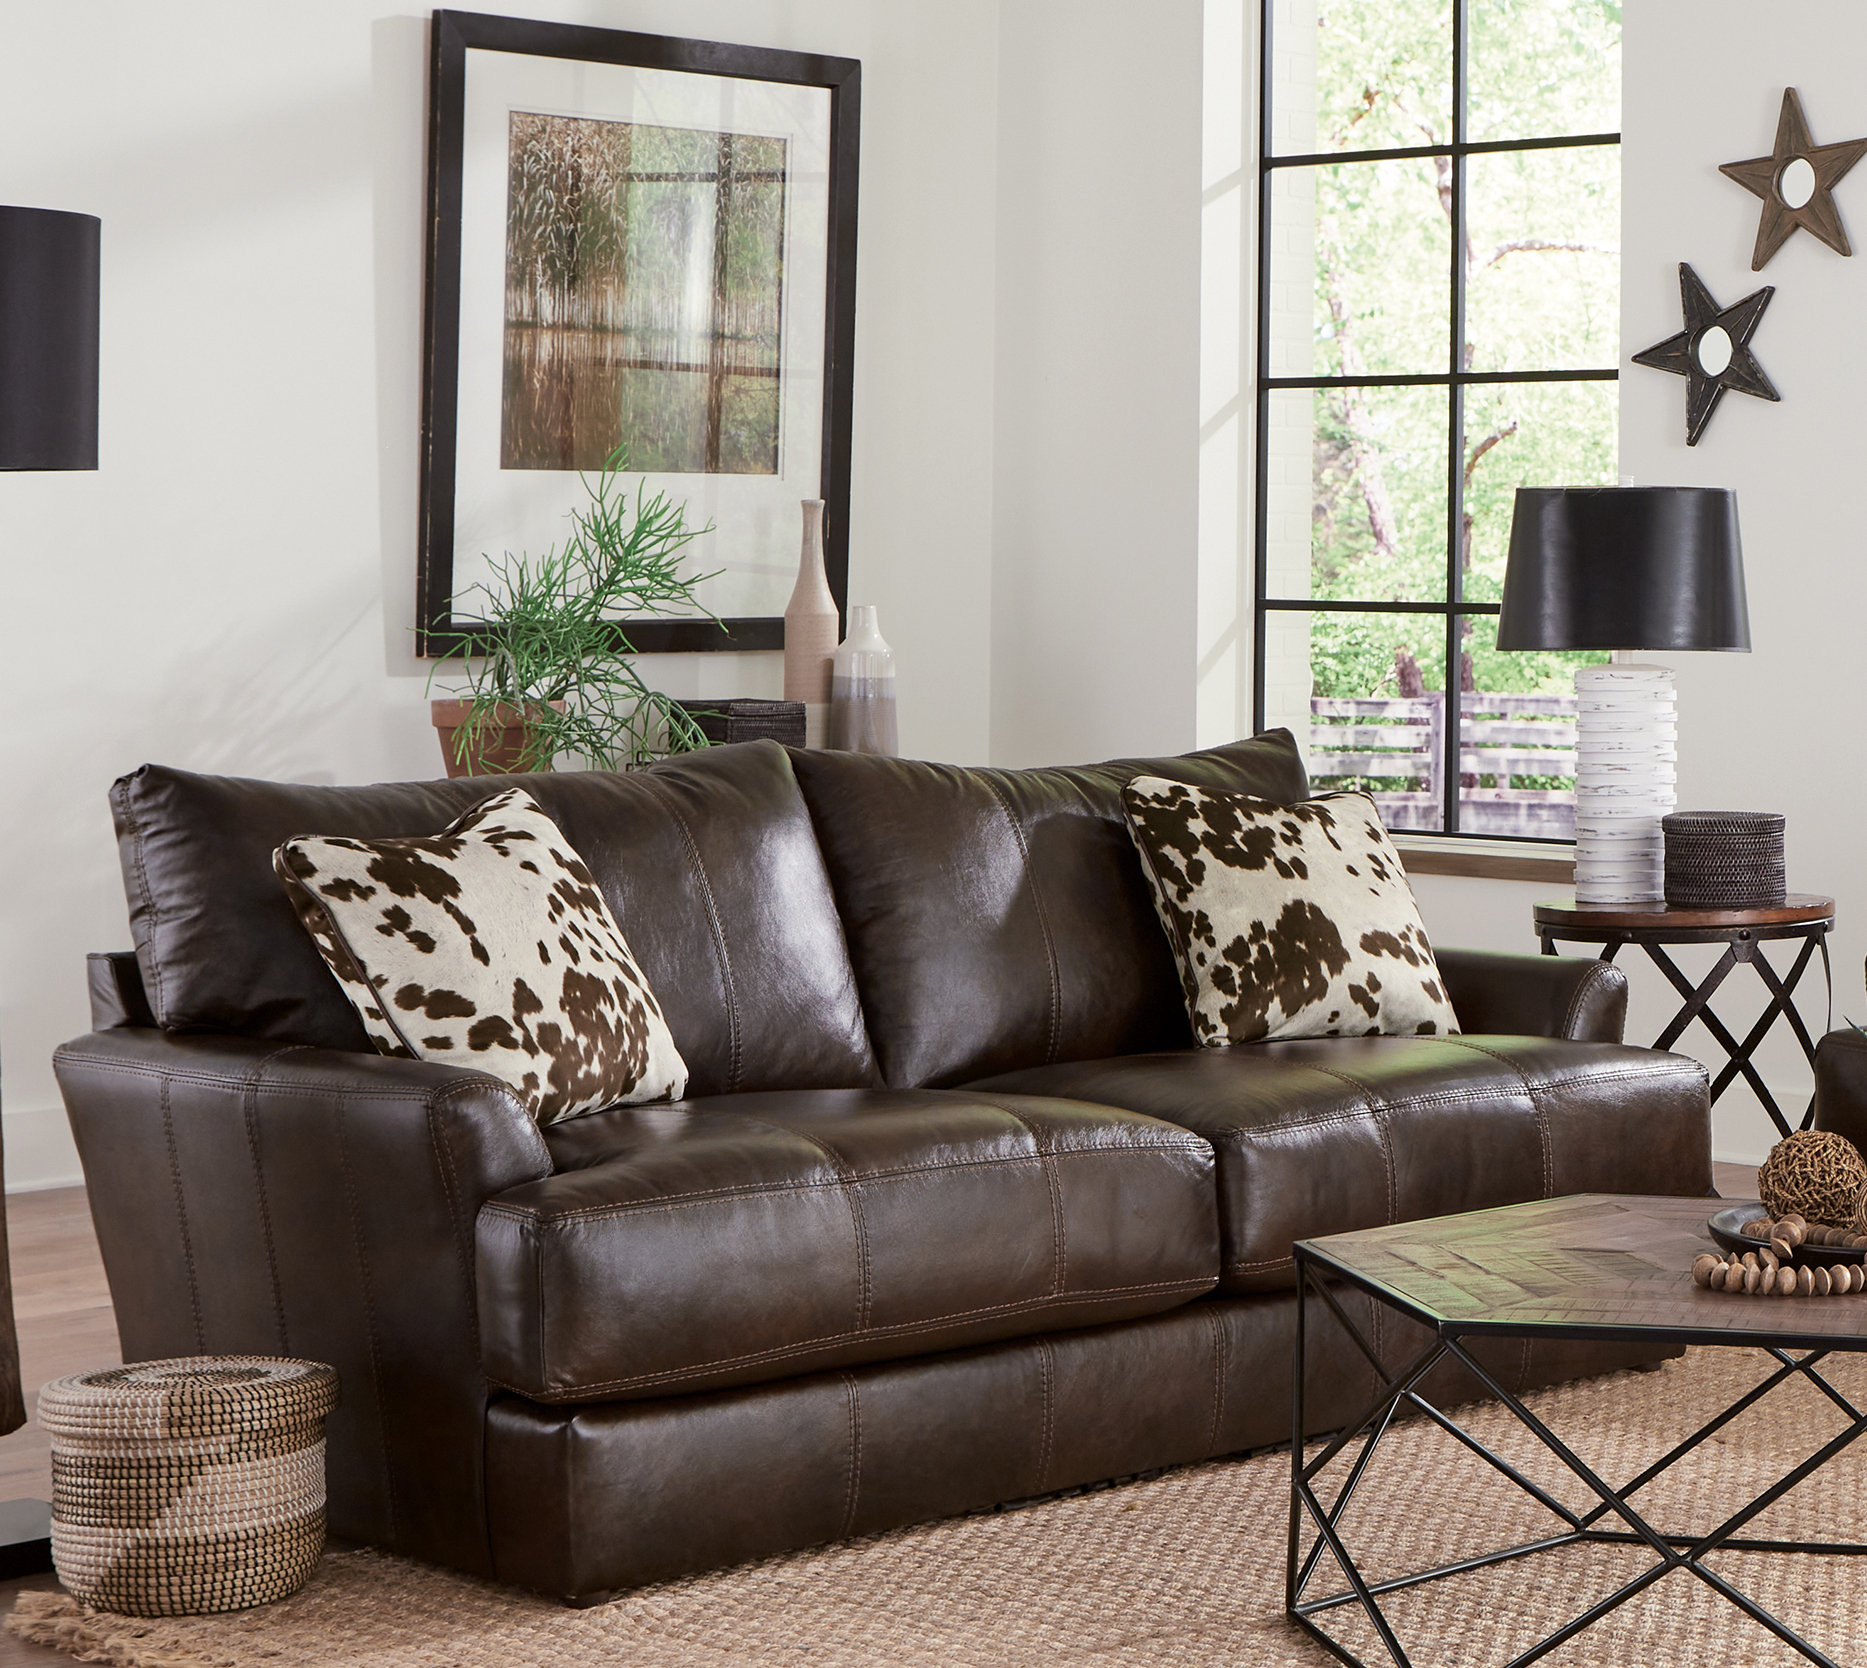 Best throw pillows for leather couch